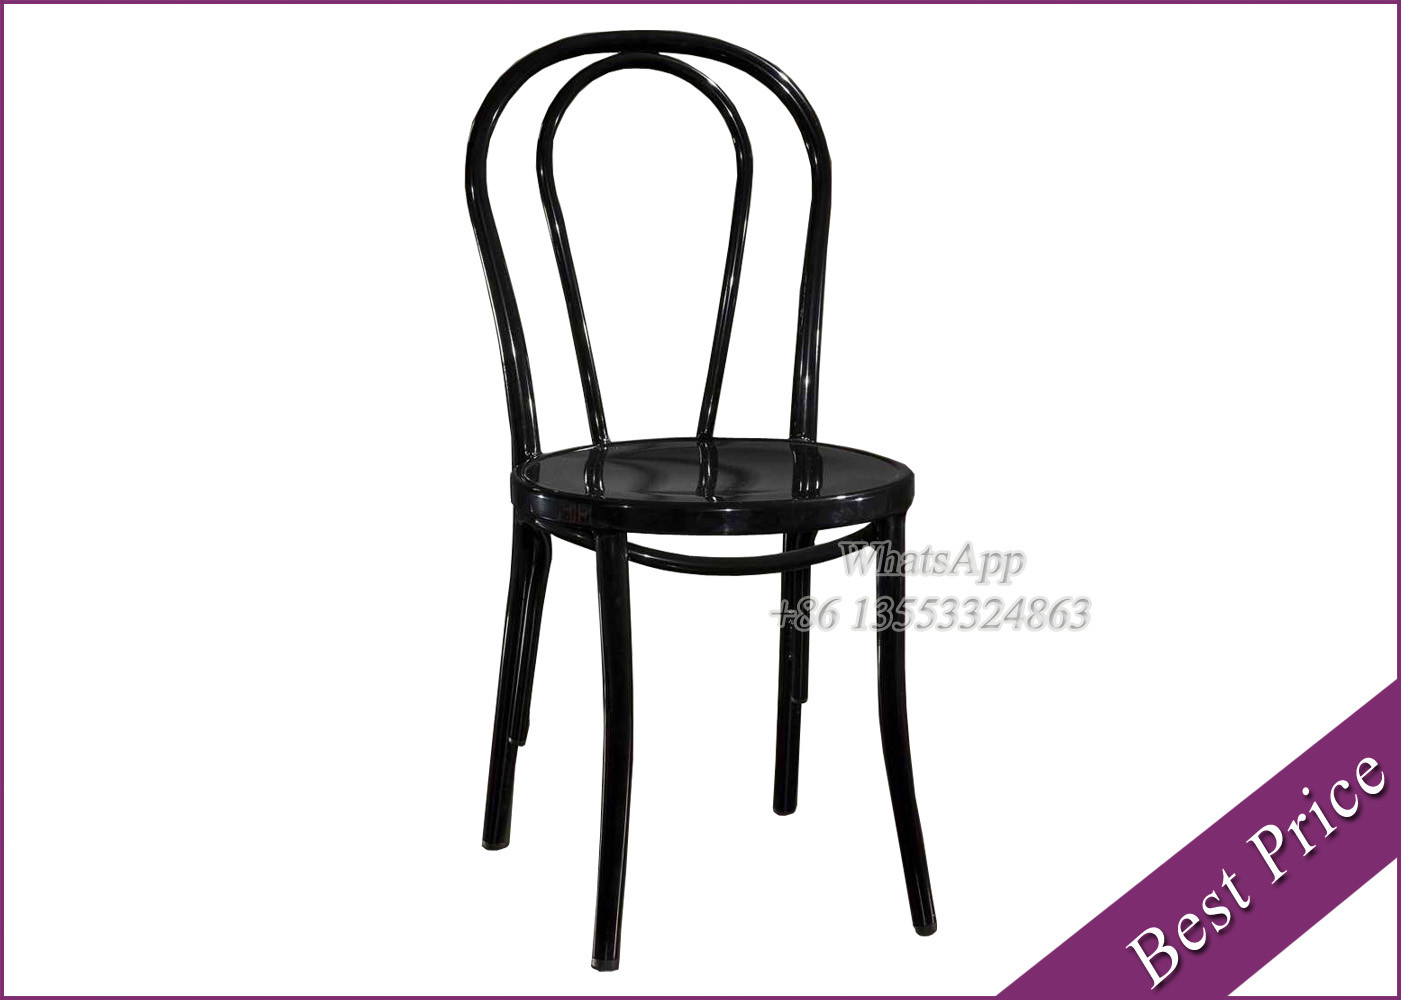 Wedding Party Metal Black Chiavari Chair For Sale With Wholesale Price (YC-7)